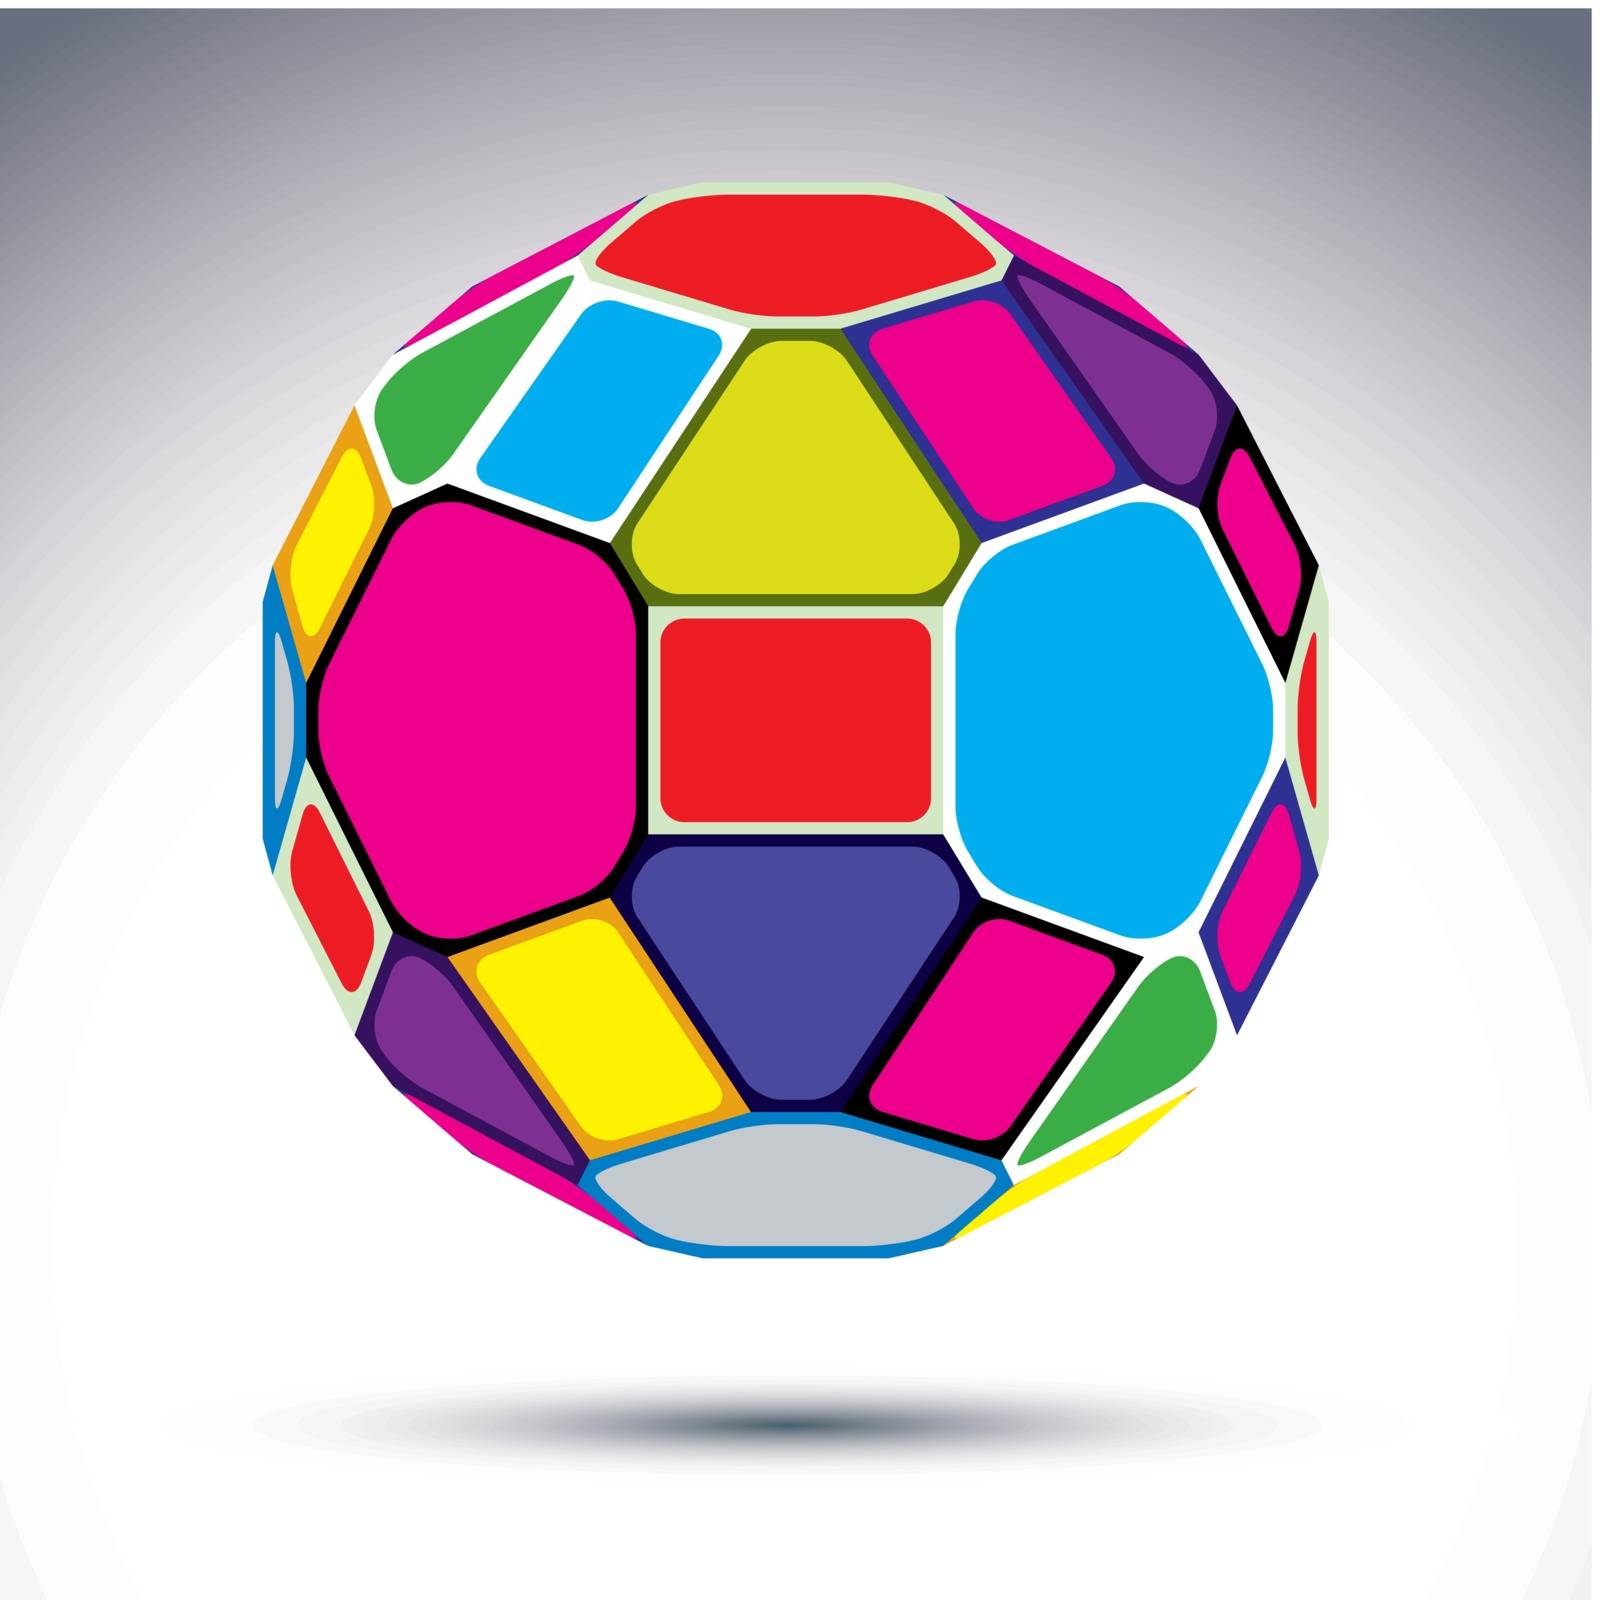 Abstract complicated 3d ball with kaleidoscope effect. Bright sp by Sylverarts